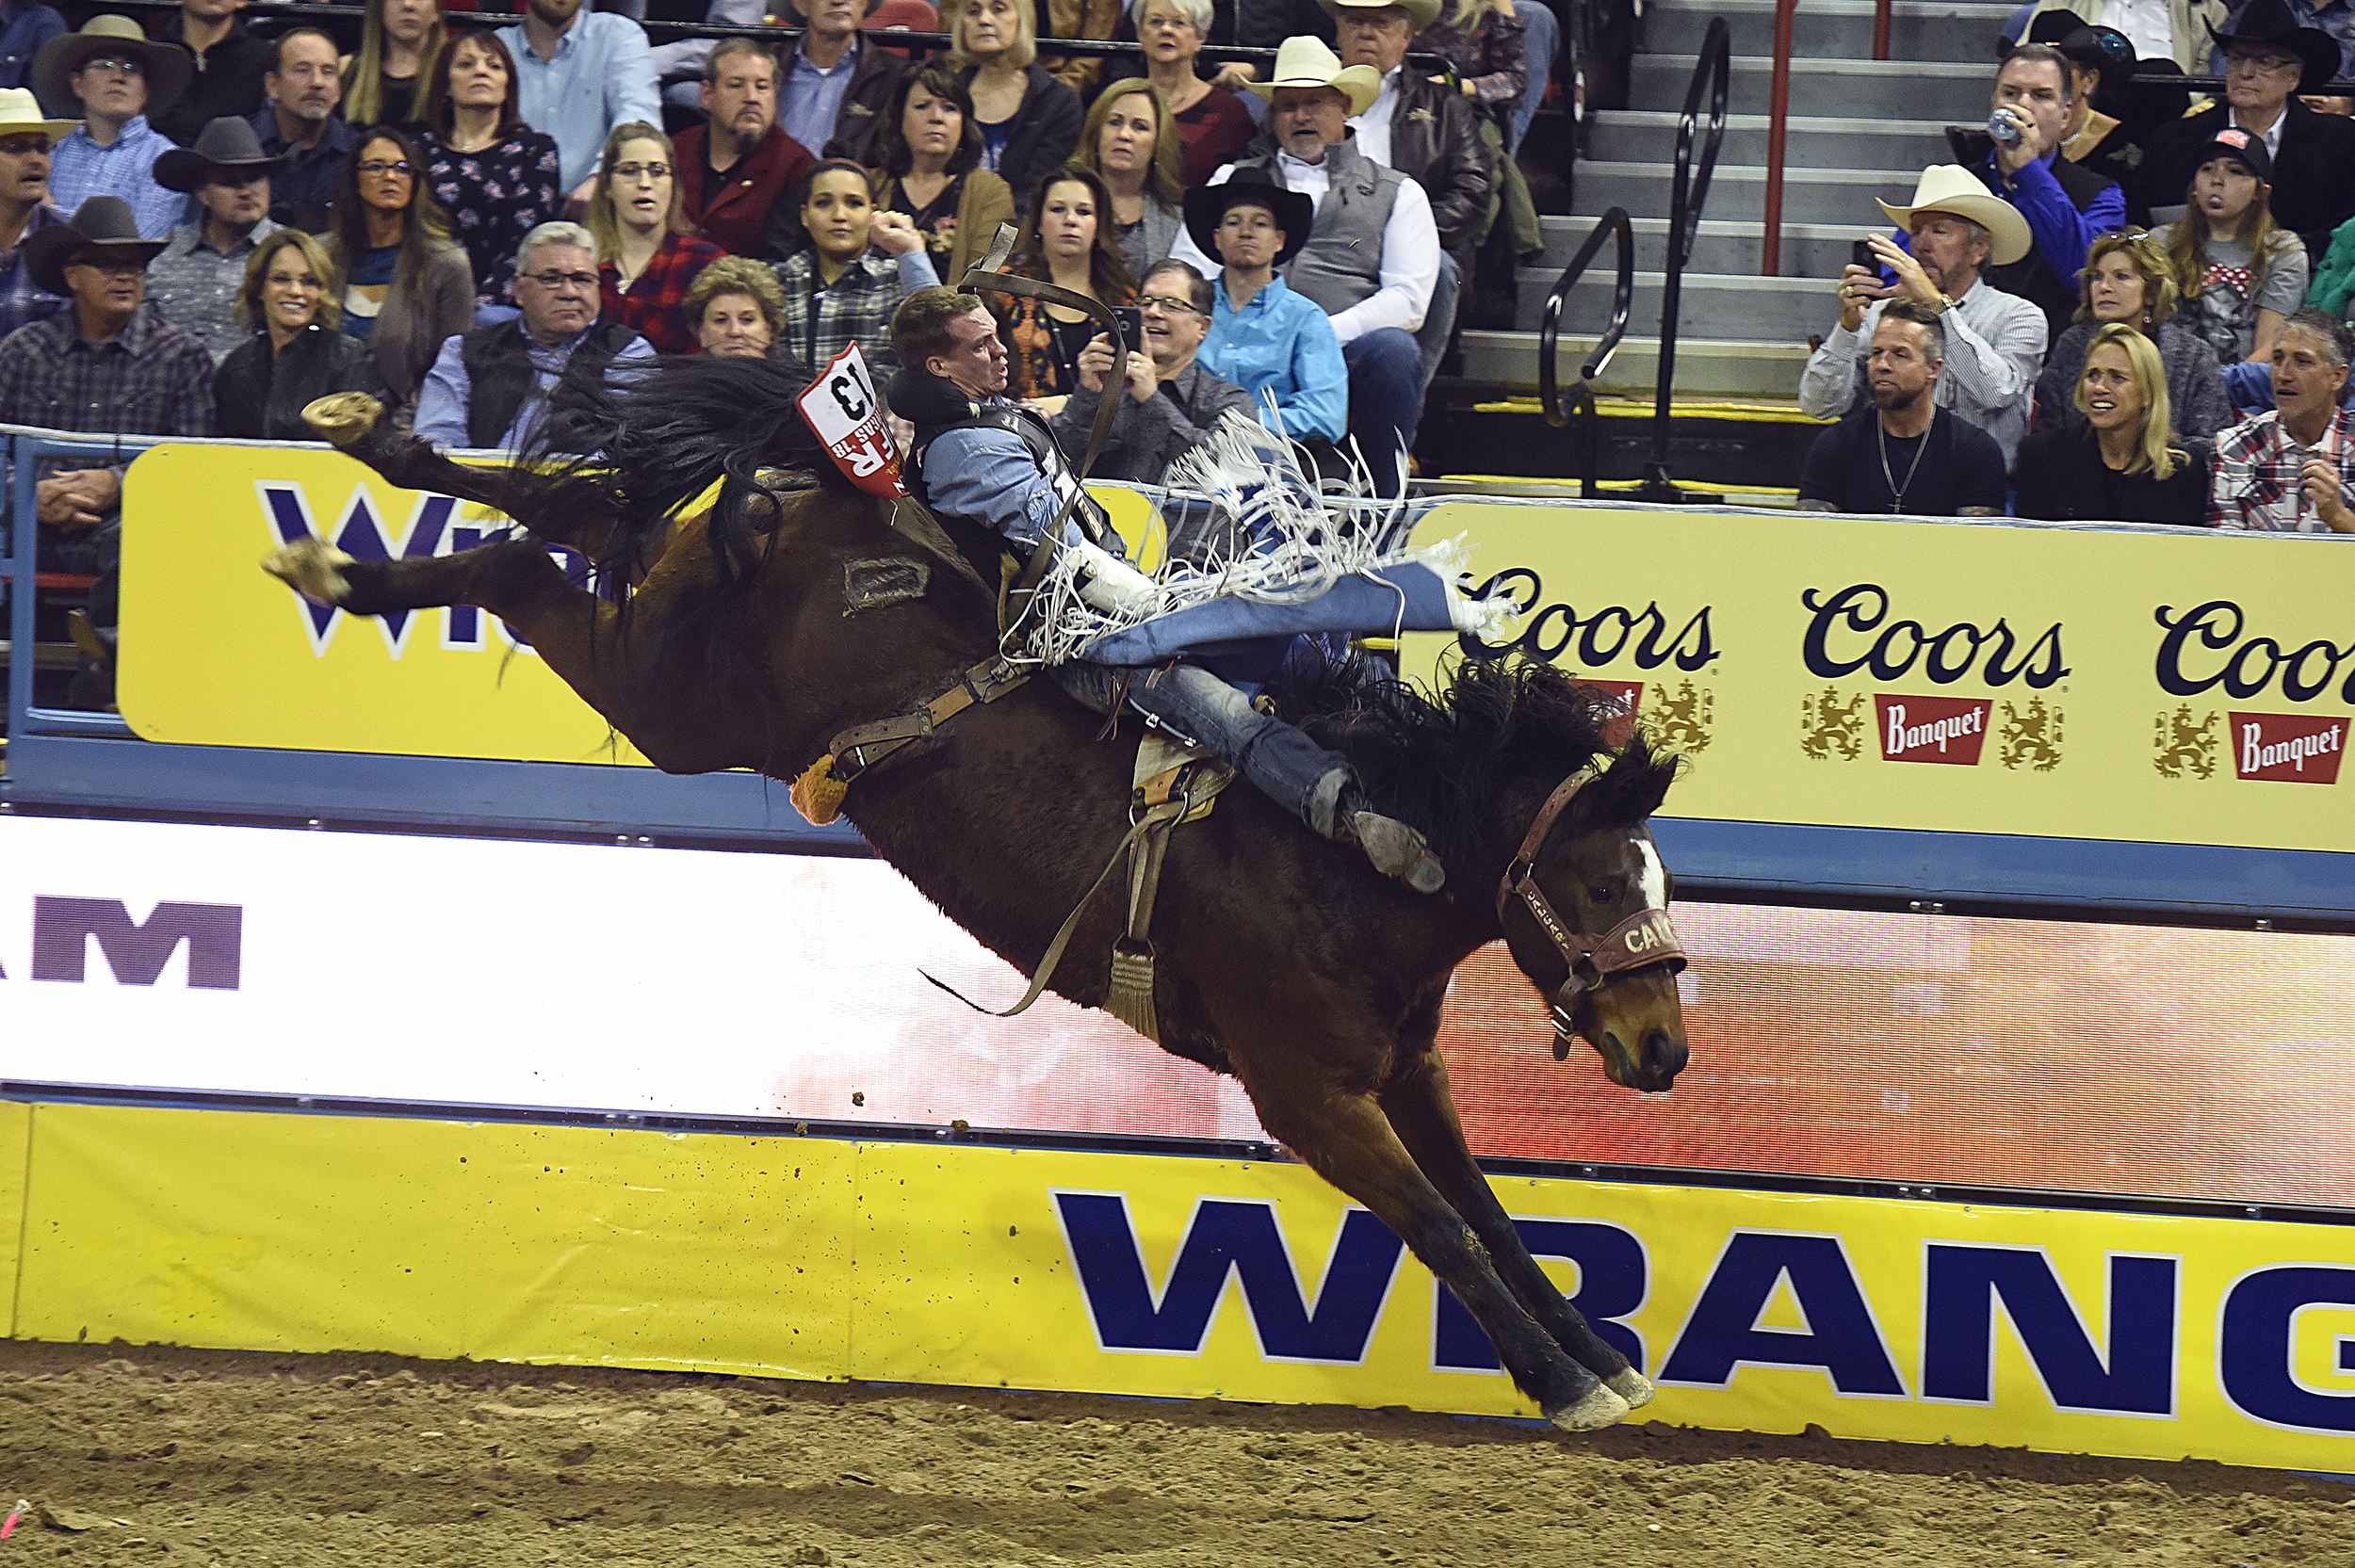 Orin Larsen matches moves with Calgary Stampede's Trail Dust for 87 points to finish second in the third round of the National Finals Rodeo. (PHOTO BY ROBBY FREEMAN)